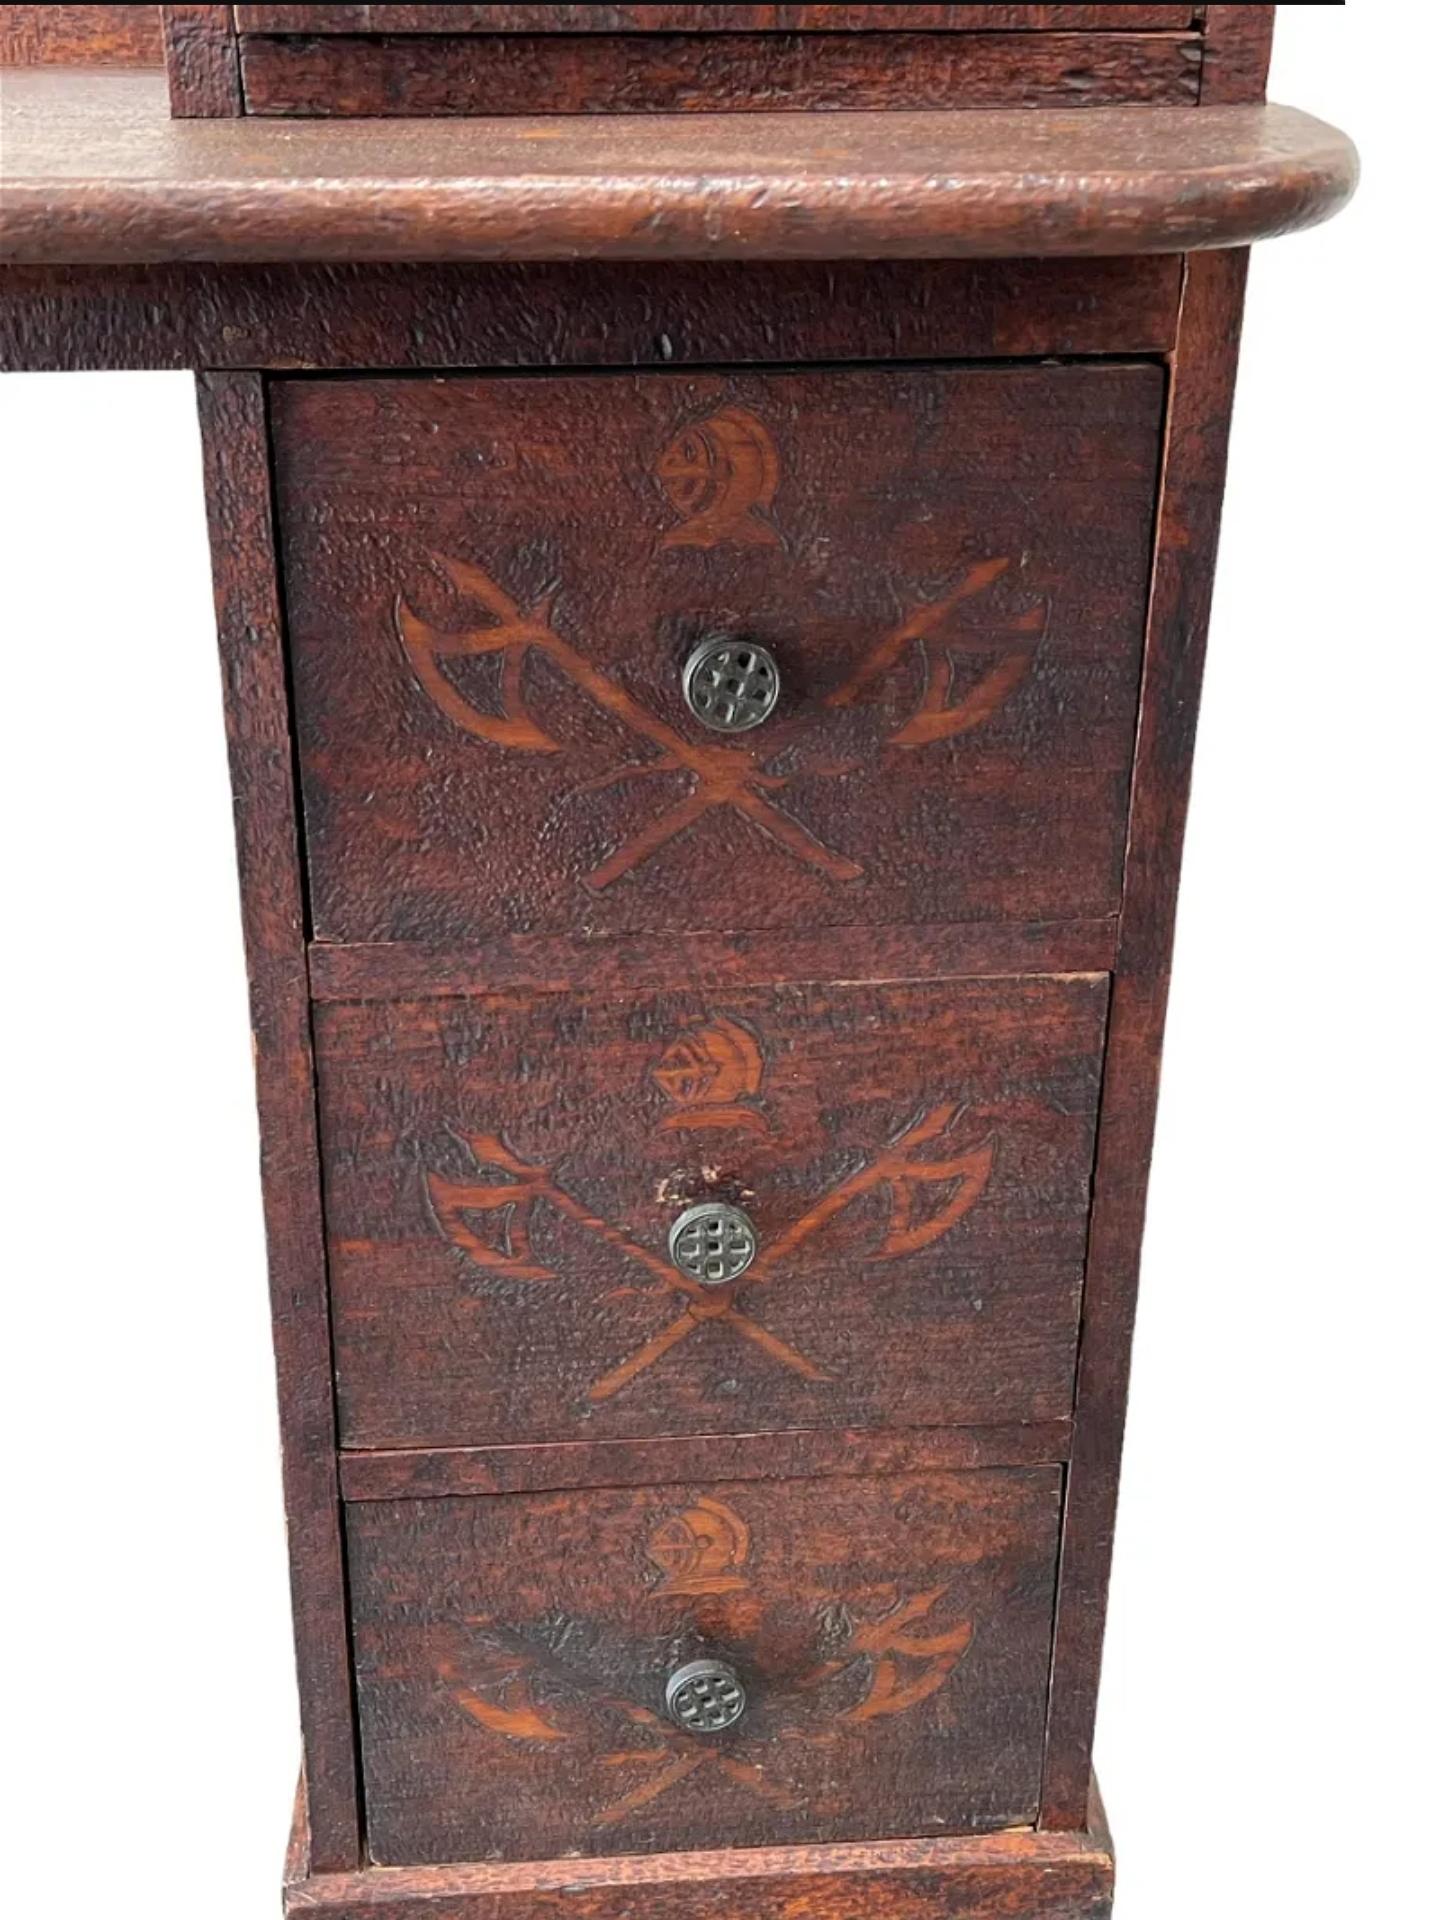 Rare Early American Country Pyrography Desk In Fair Condition For Sale In Forney, TX